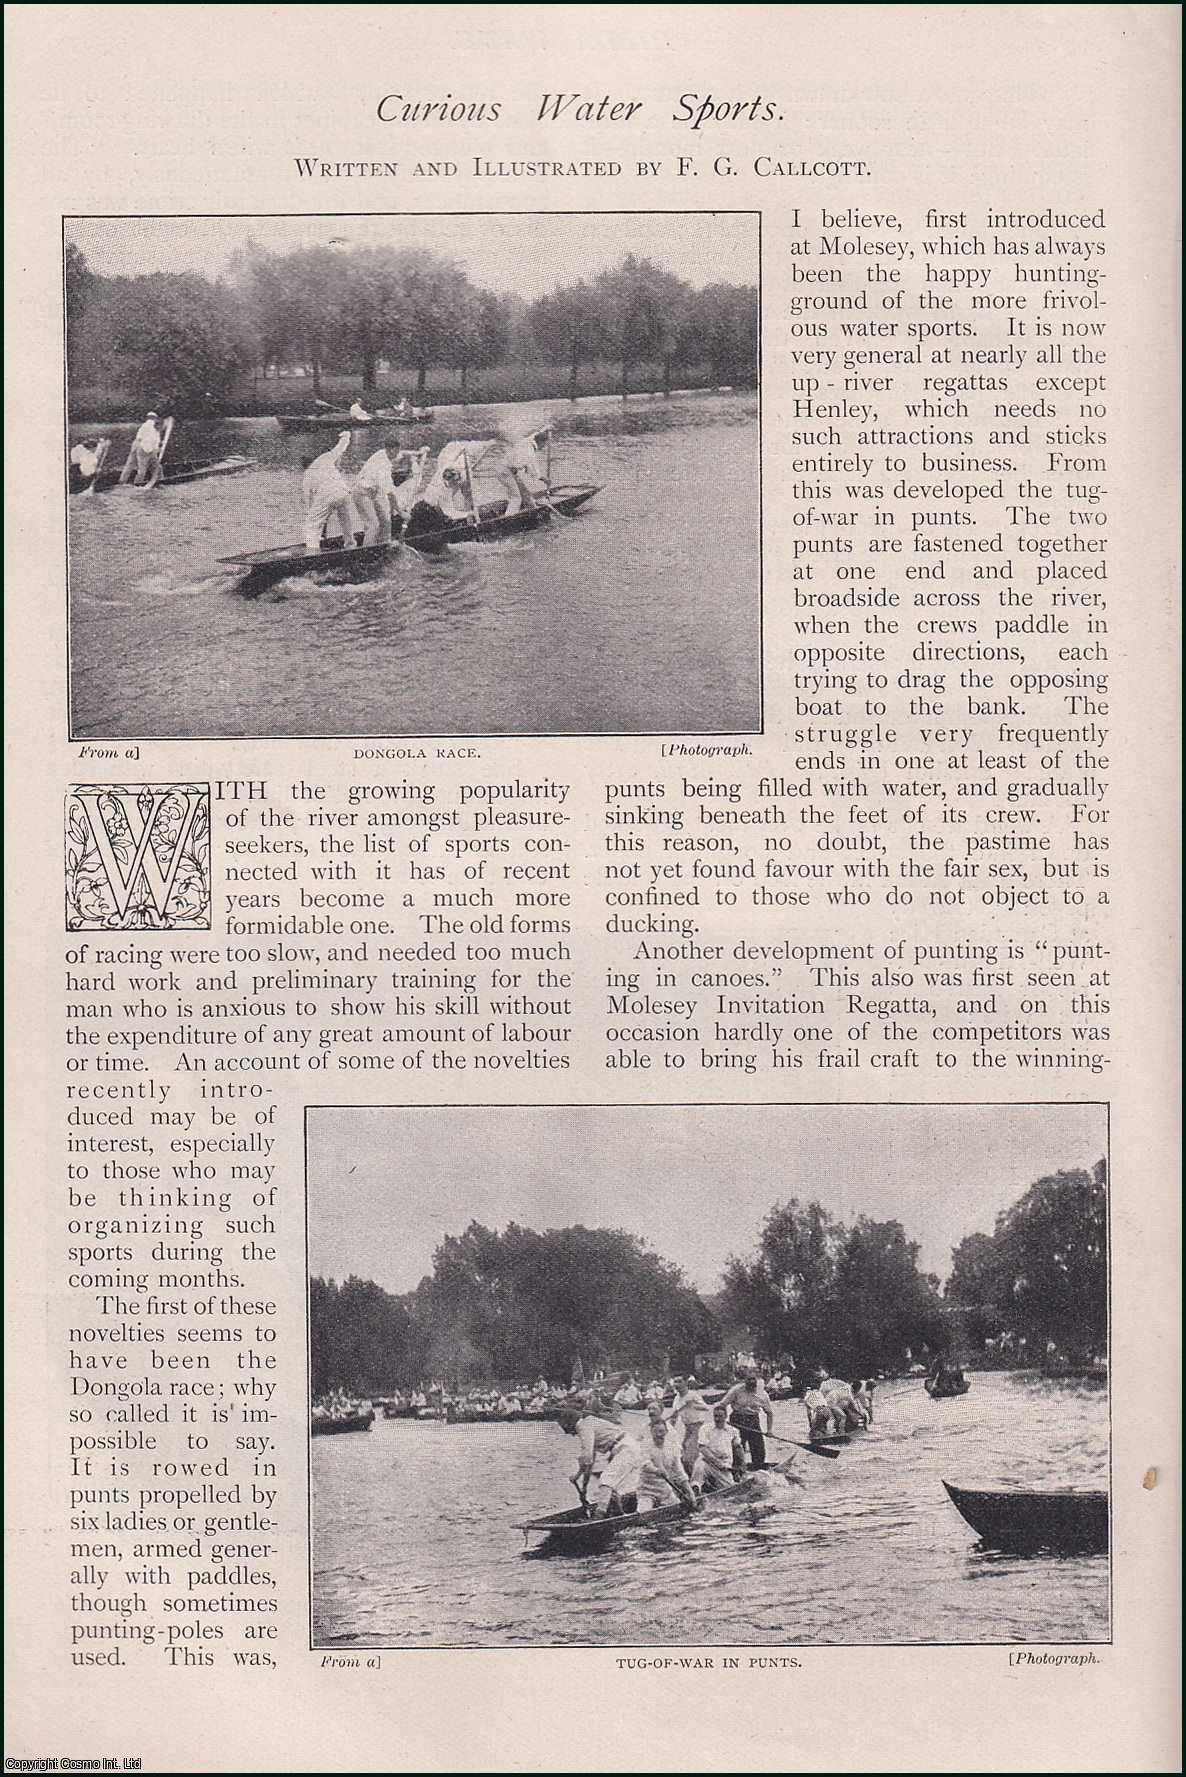 Written & illustrated by F.G. Callcott. - Curious Water Sports : punting in canoes ; dongola racing ; tug-of-war in punts & more. An uncommon original article from The Strand Magazine, 1899.